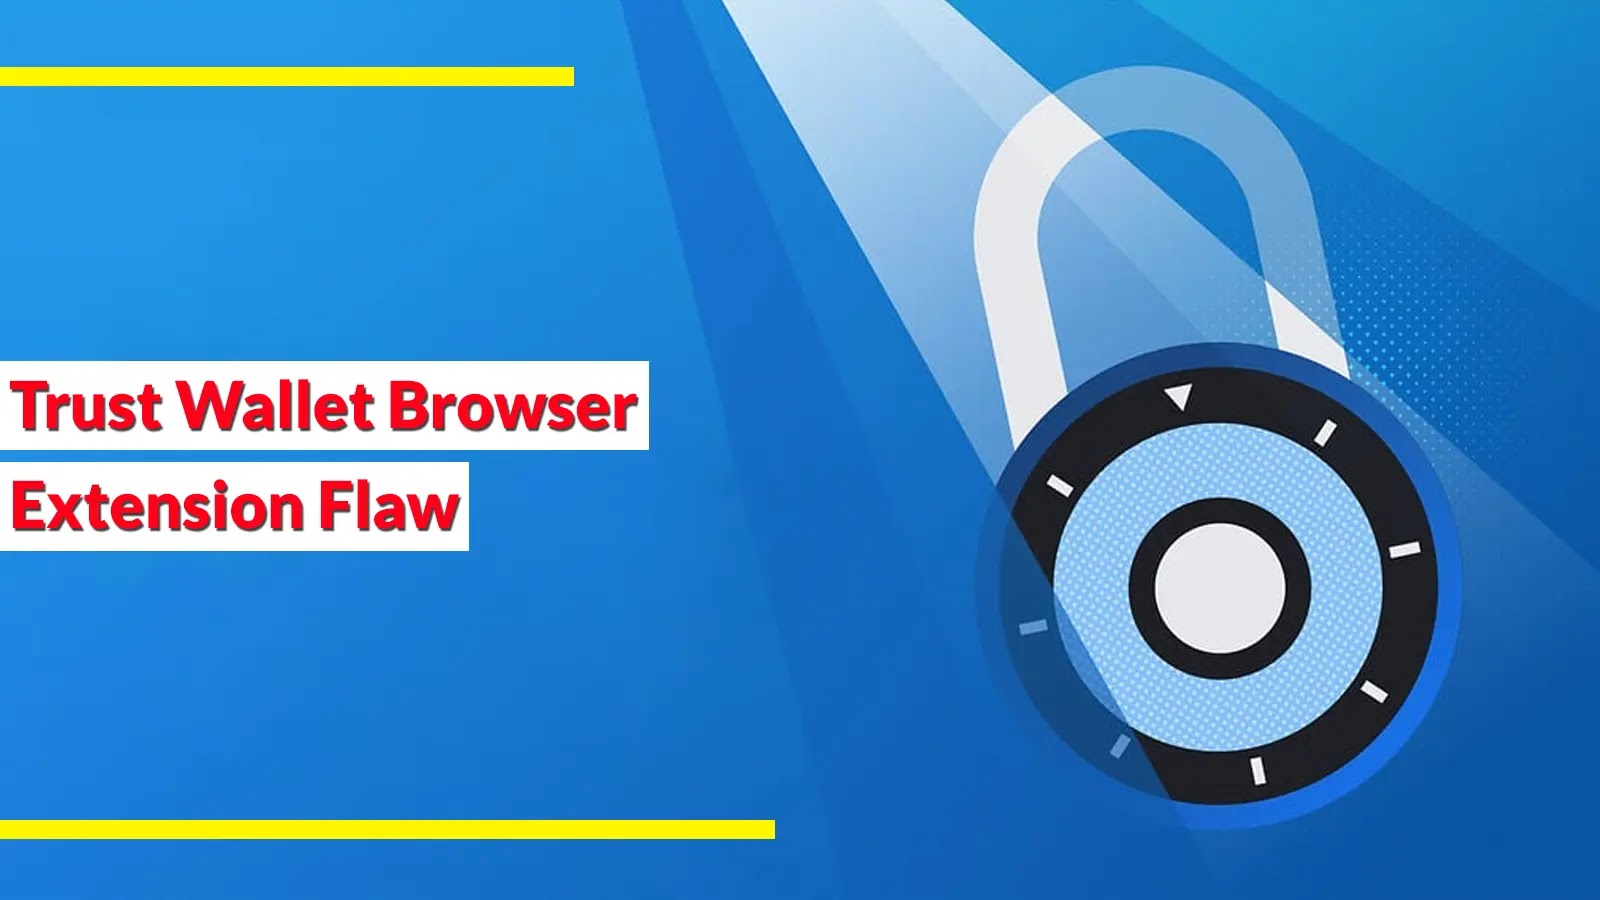 Trust Wallet Browser Extension Flaw Lets Attackers Steal Funds Without User Interaction